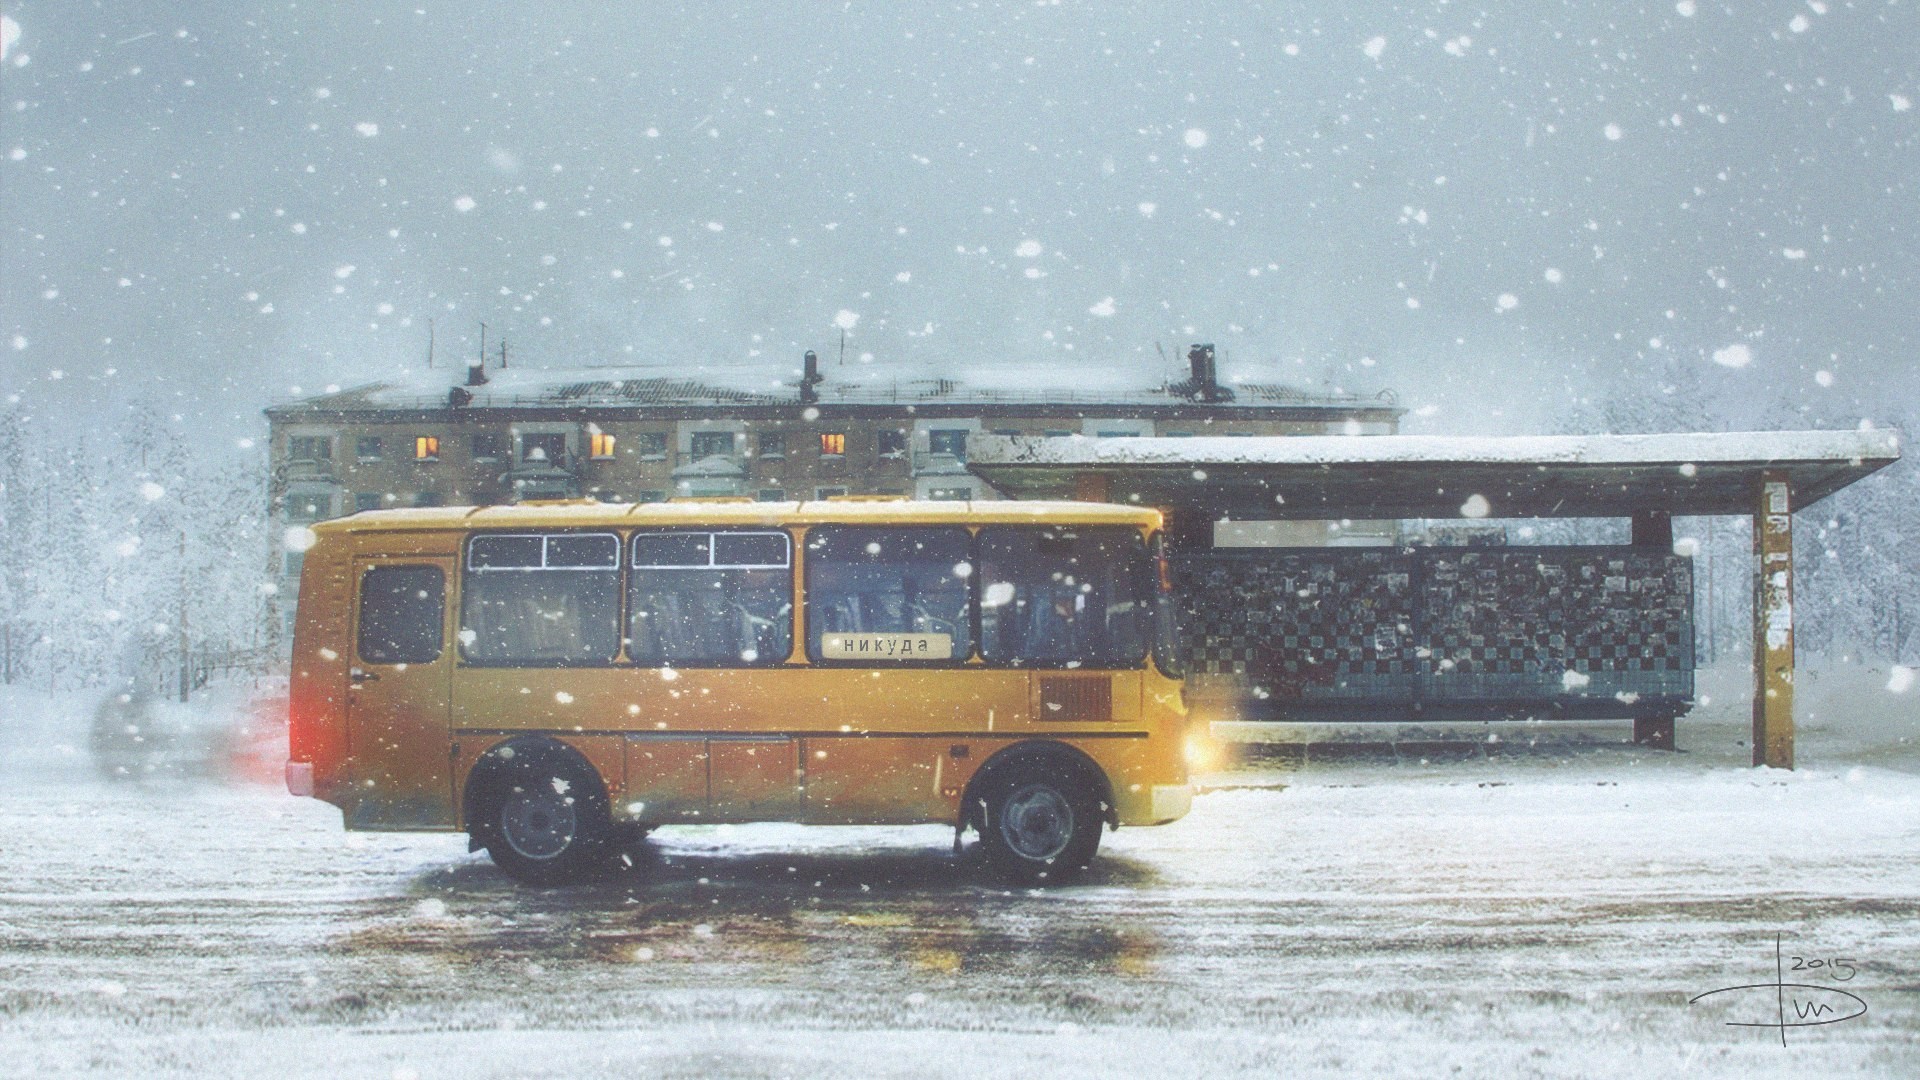 winter, Sadness, Alone, Snow flakes, Buses, City, Road Wallpaper